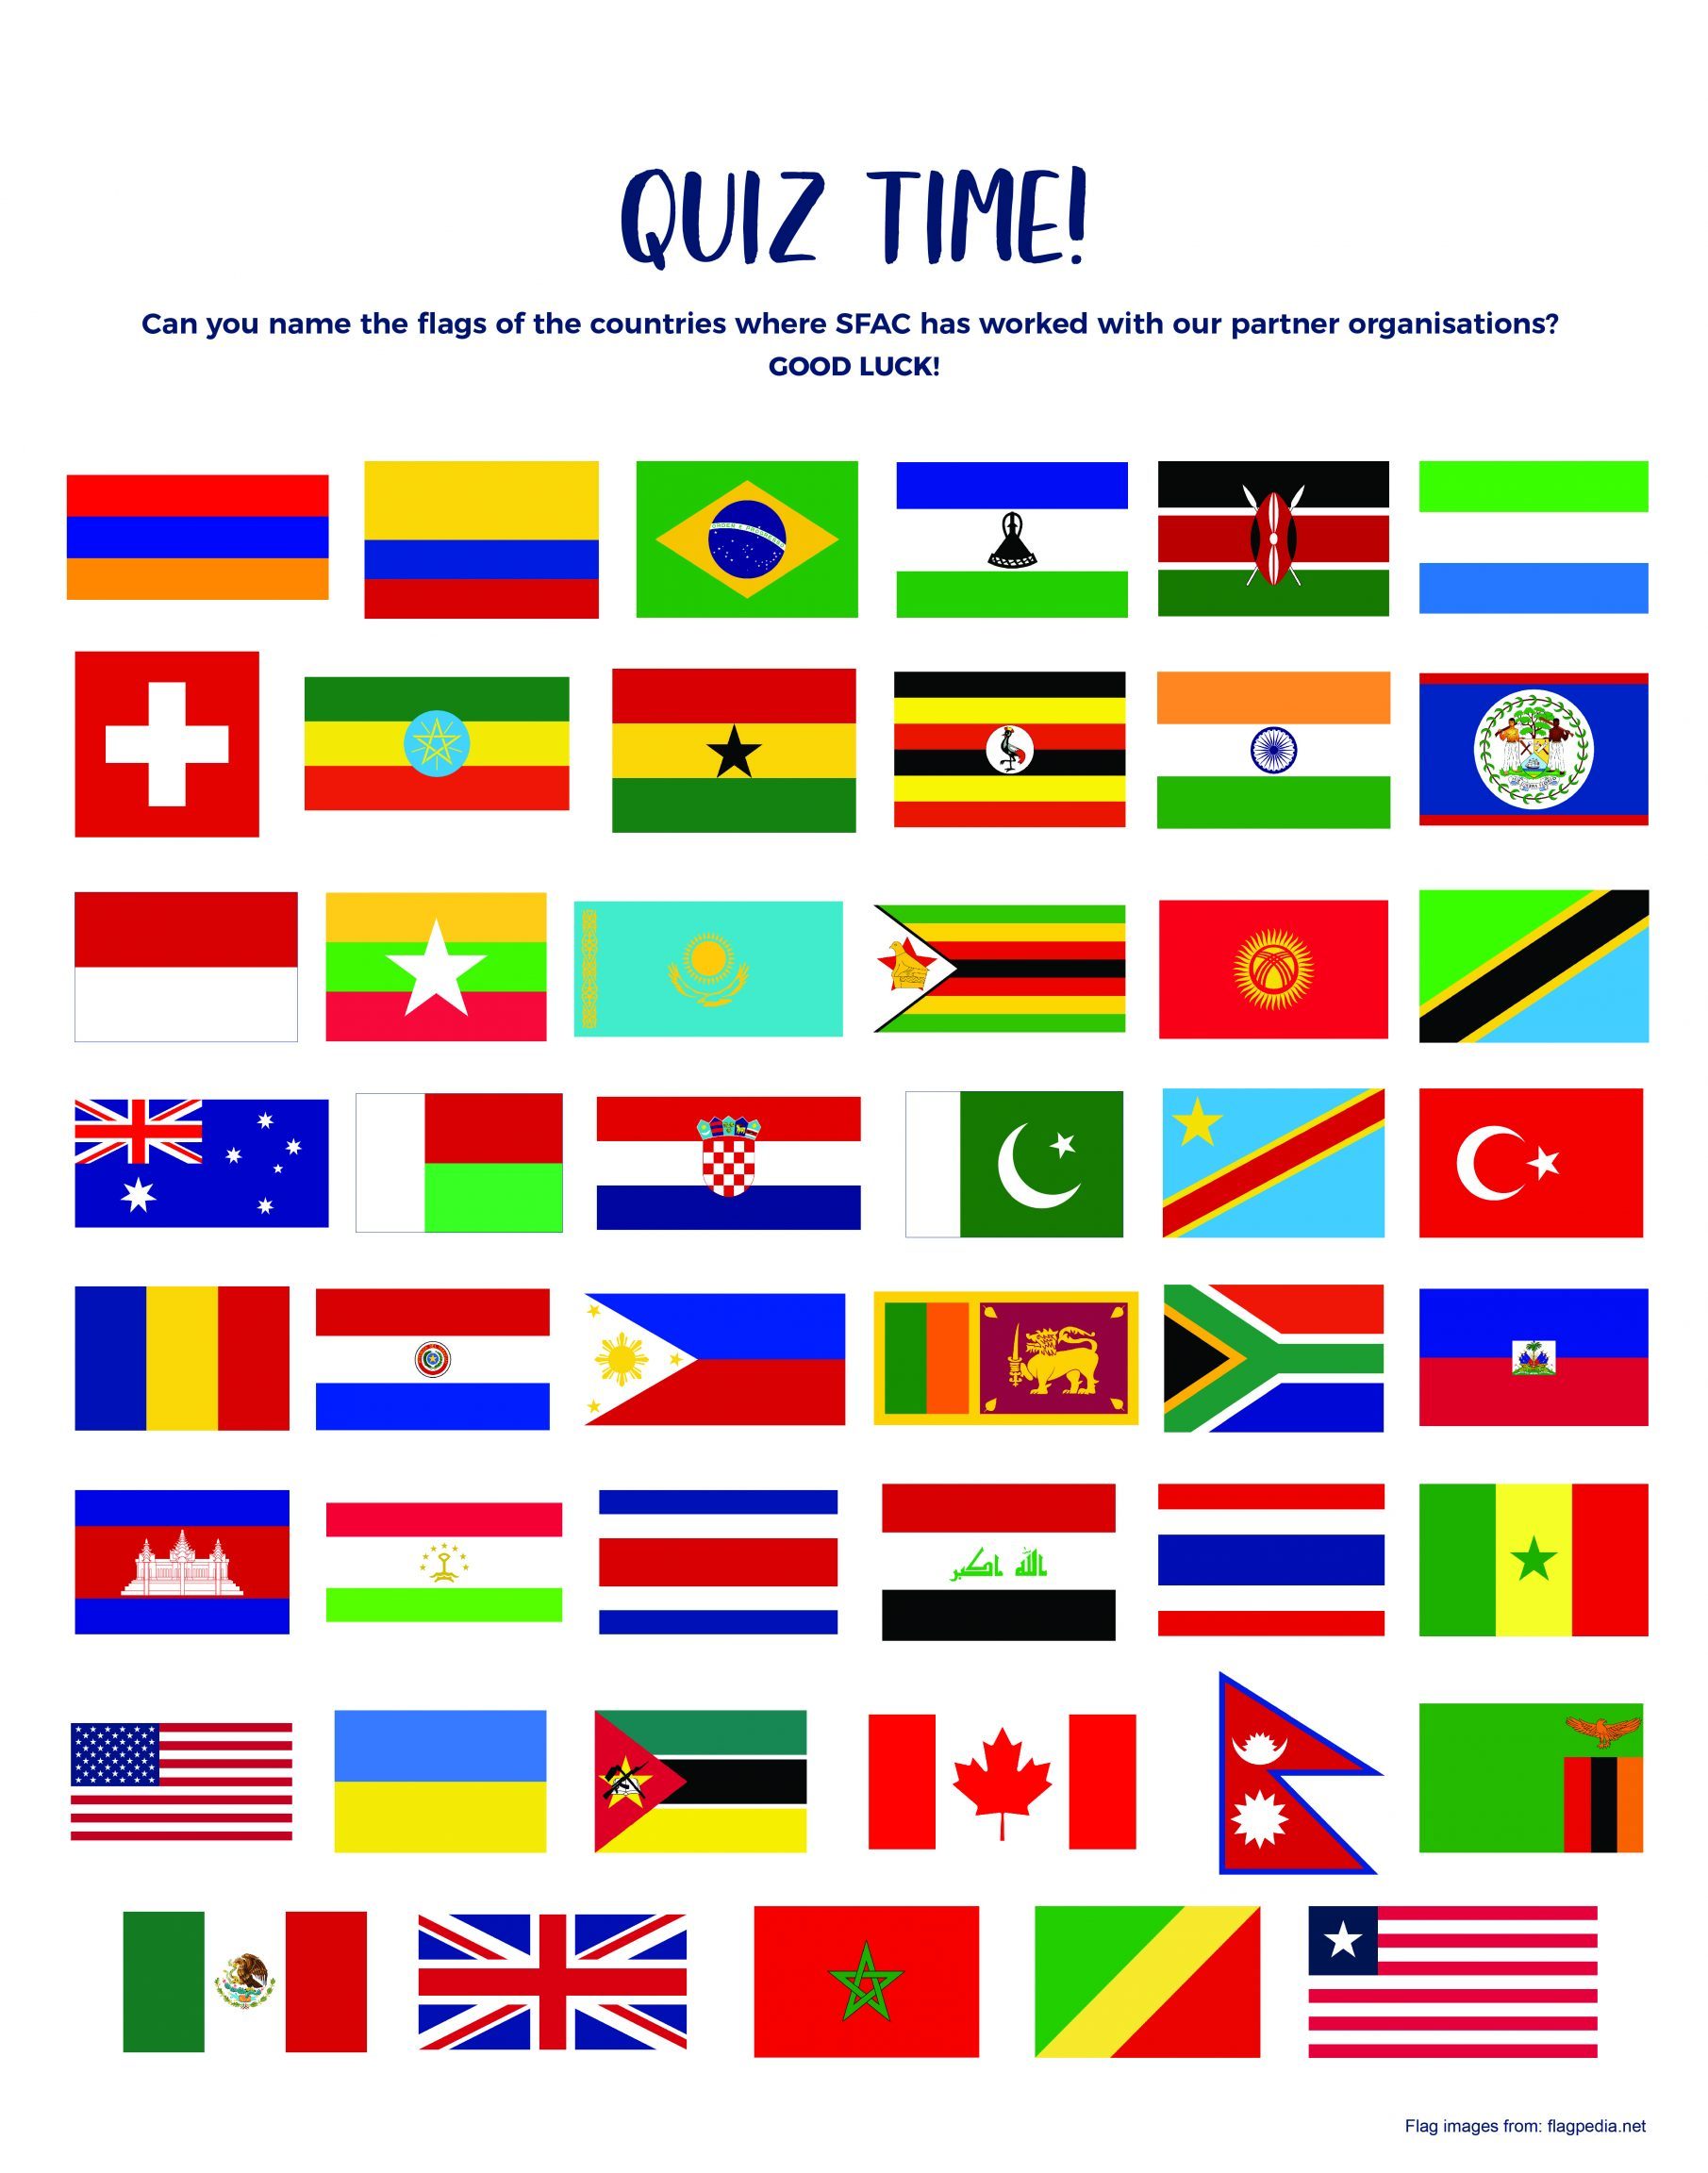 Flag Quiz - 47 flags representing the countries where SFAC has worked with partner organisations